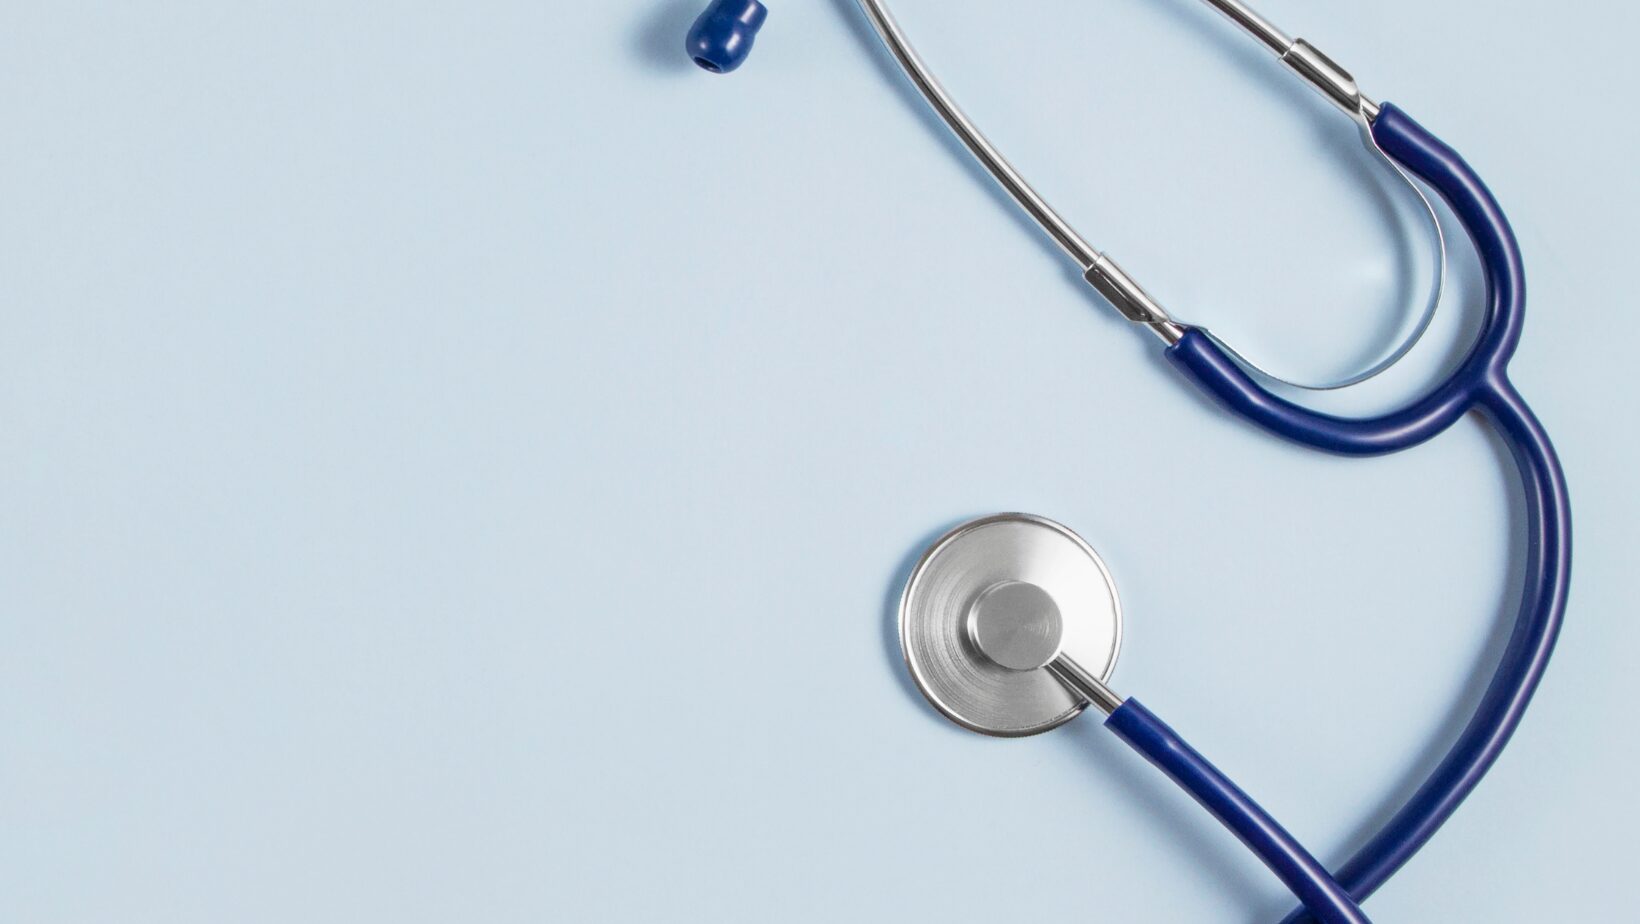 black and silver stethoscope on a light blue background